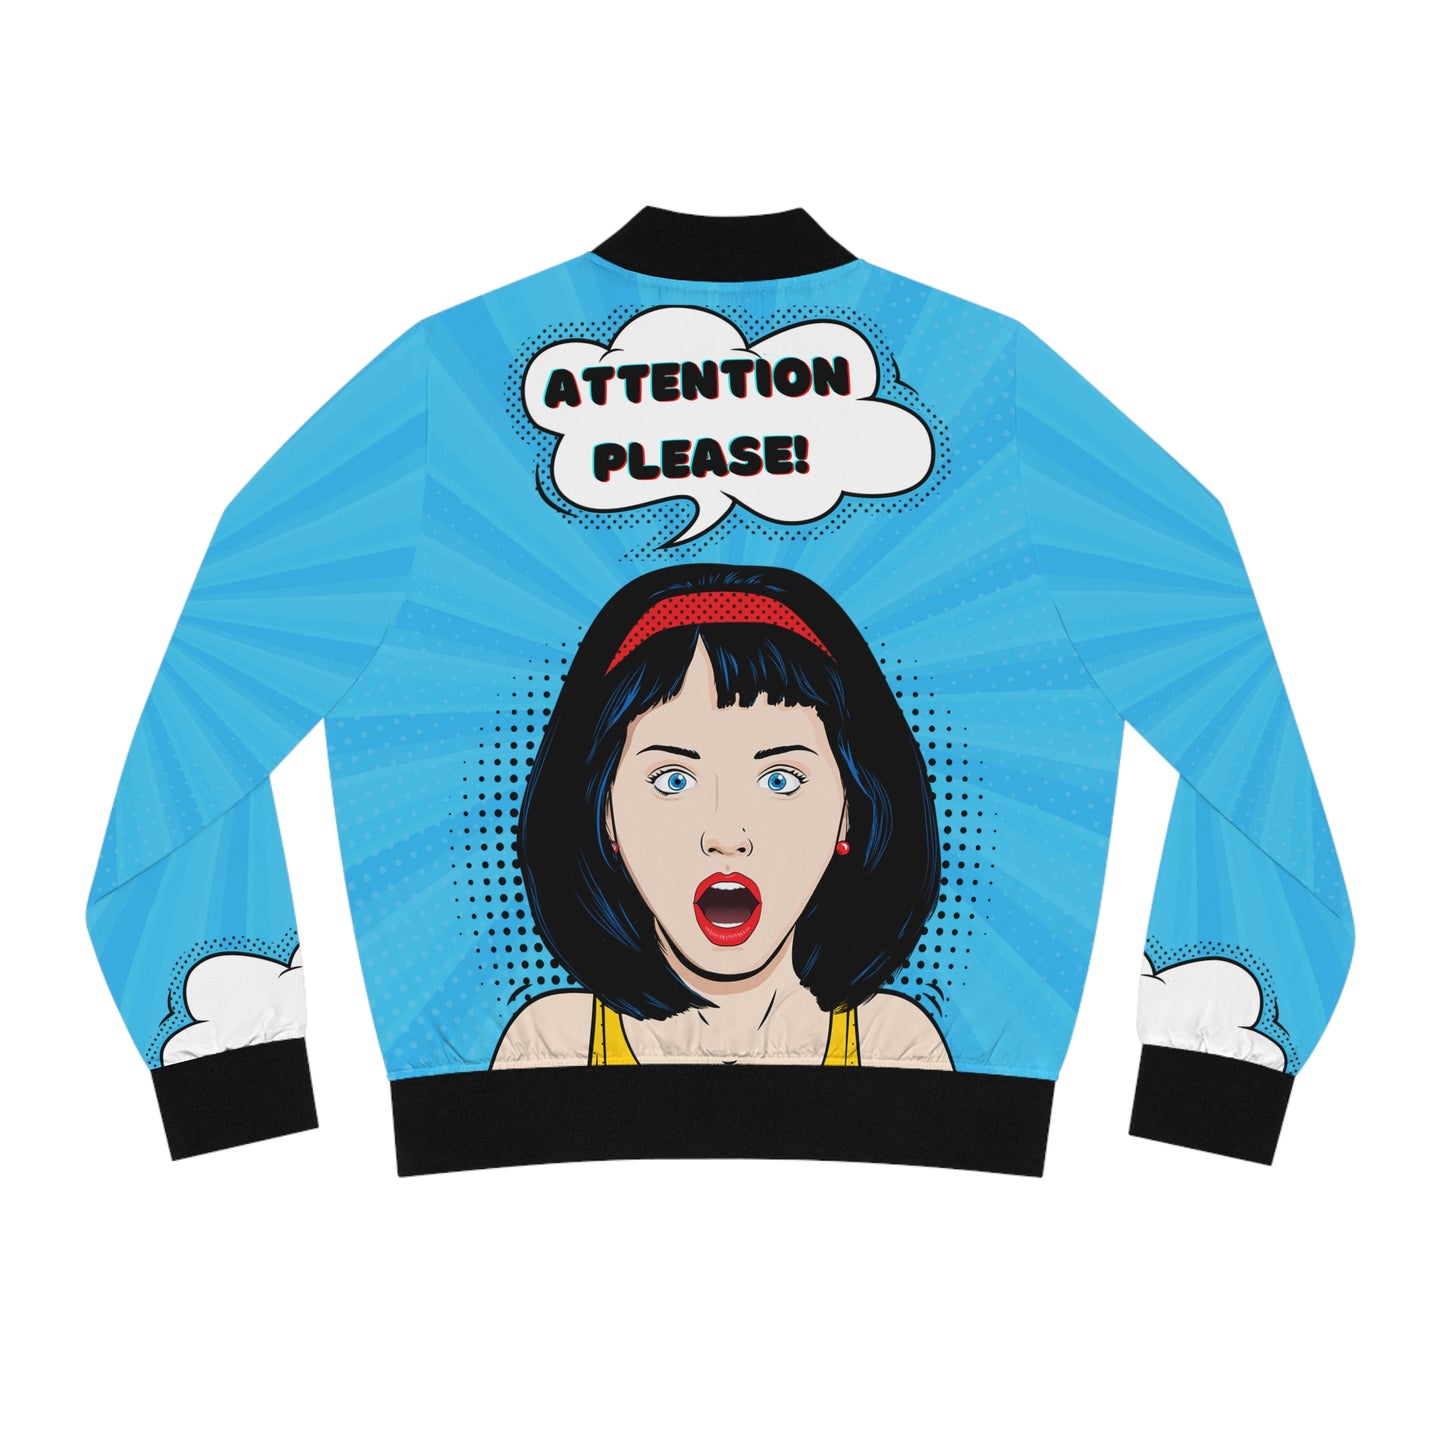 Women's Bomber Jacket | Attention Please! - Ribooa